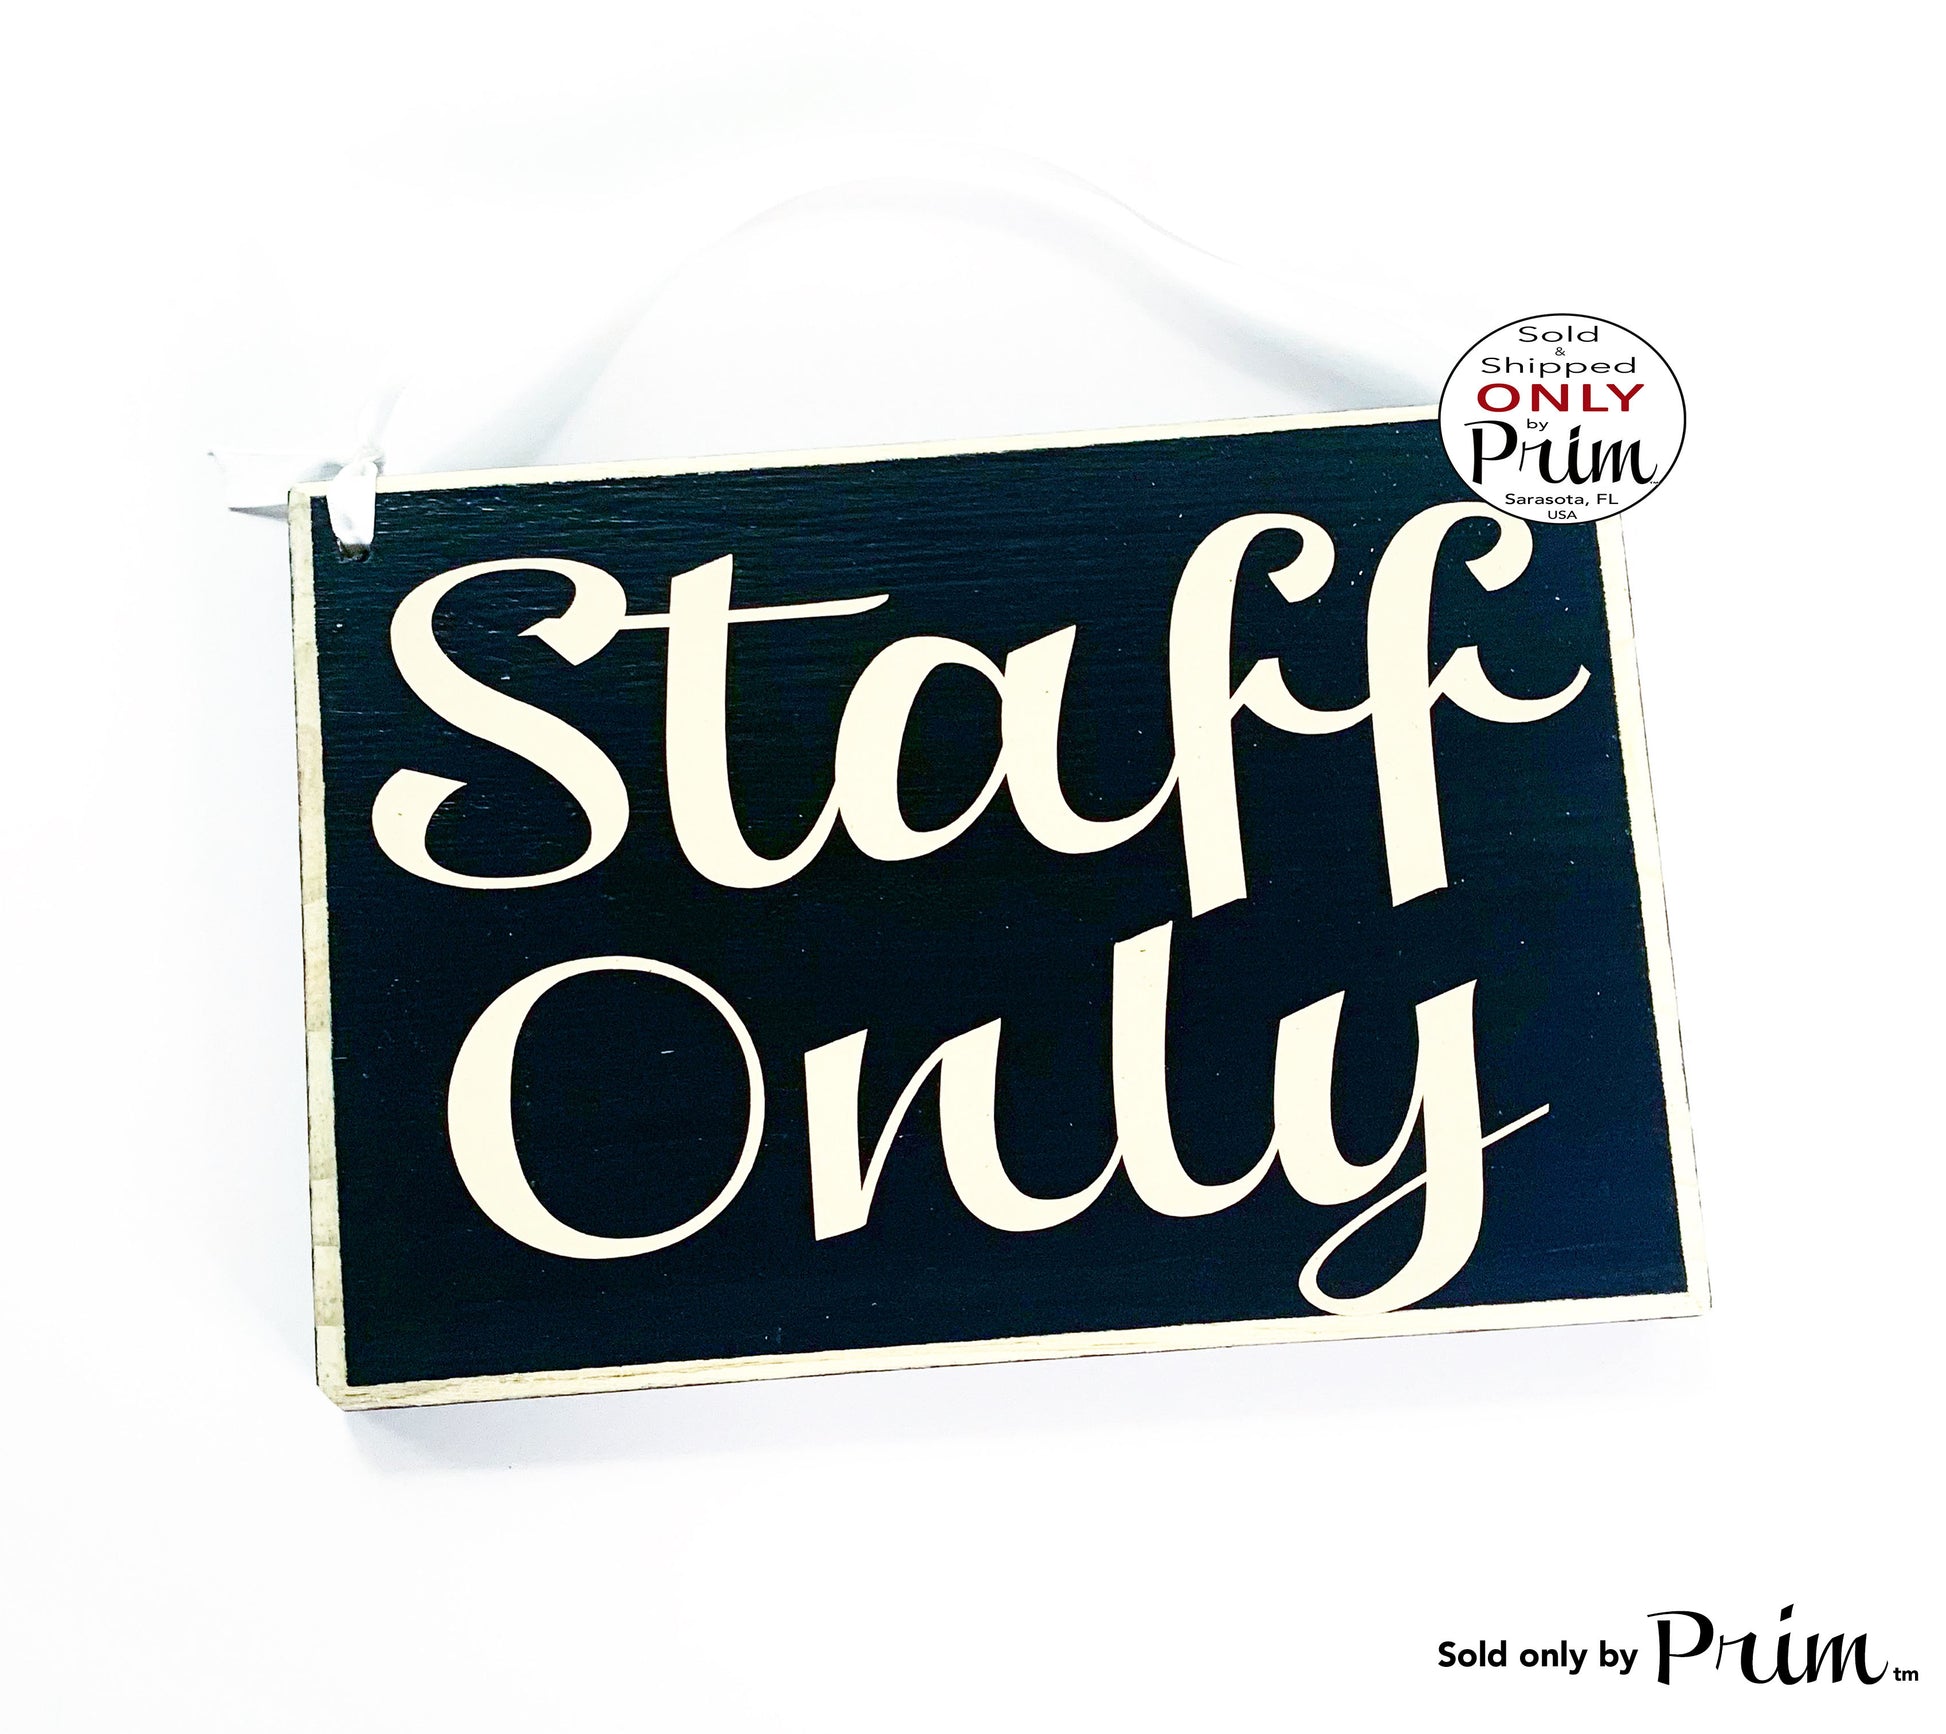 8x6 Staff Only Custom Wood Sign Employees Please Do Not Enter Office Private No Entry Business Store Shop Salon Spa Wall Decor Door Plaque Designs by Prim